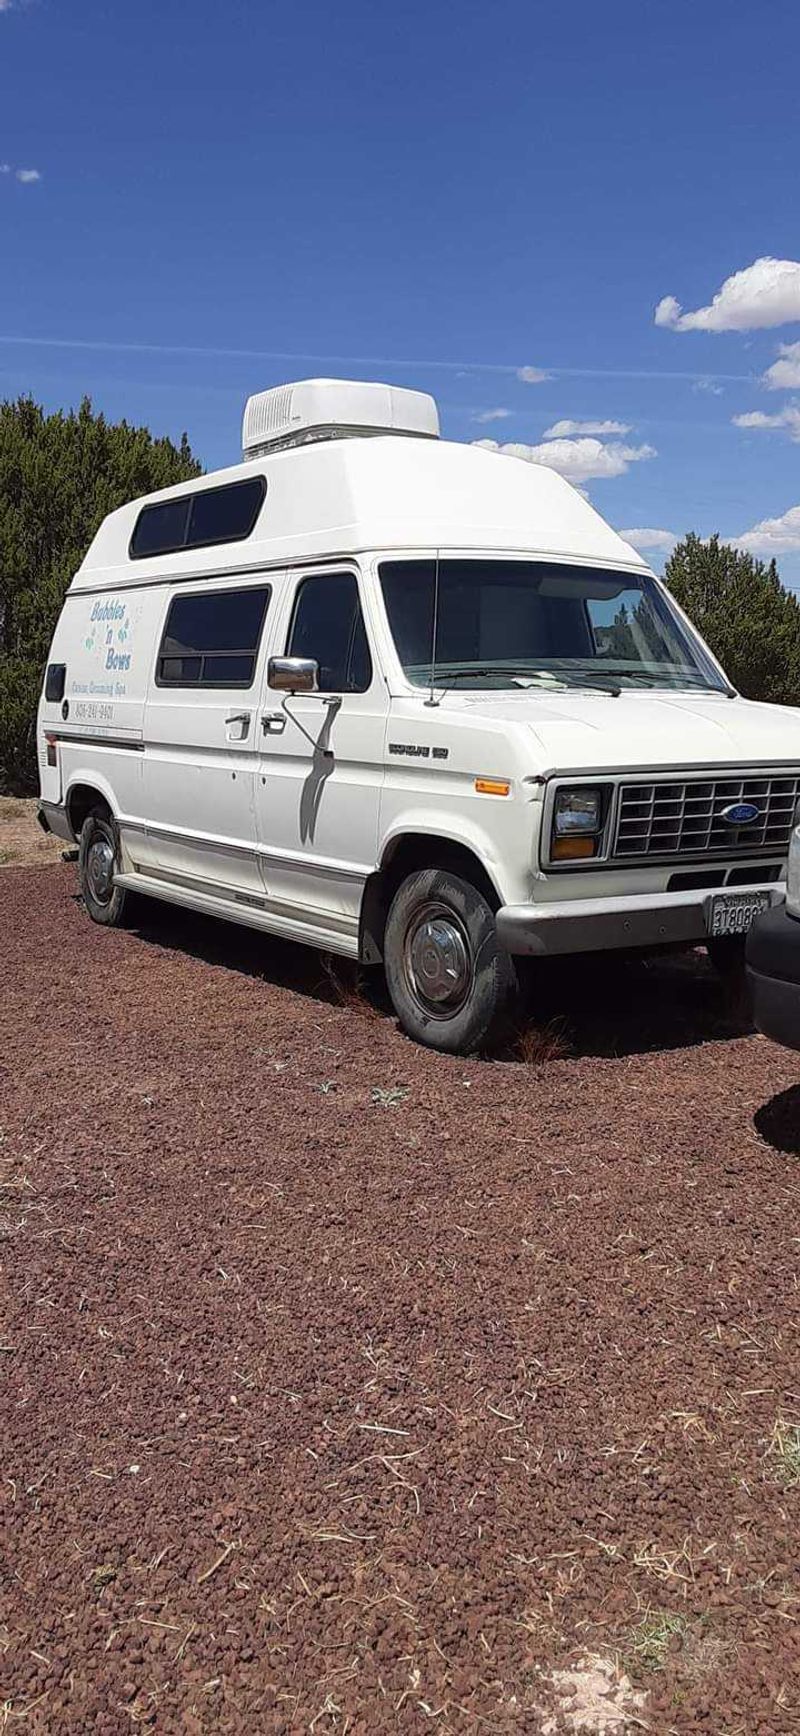 Picture 2/6 of a Project topper van for sale in Show Low, Arizona